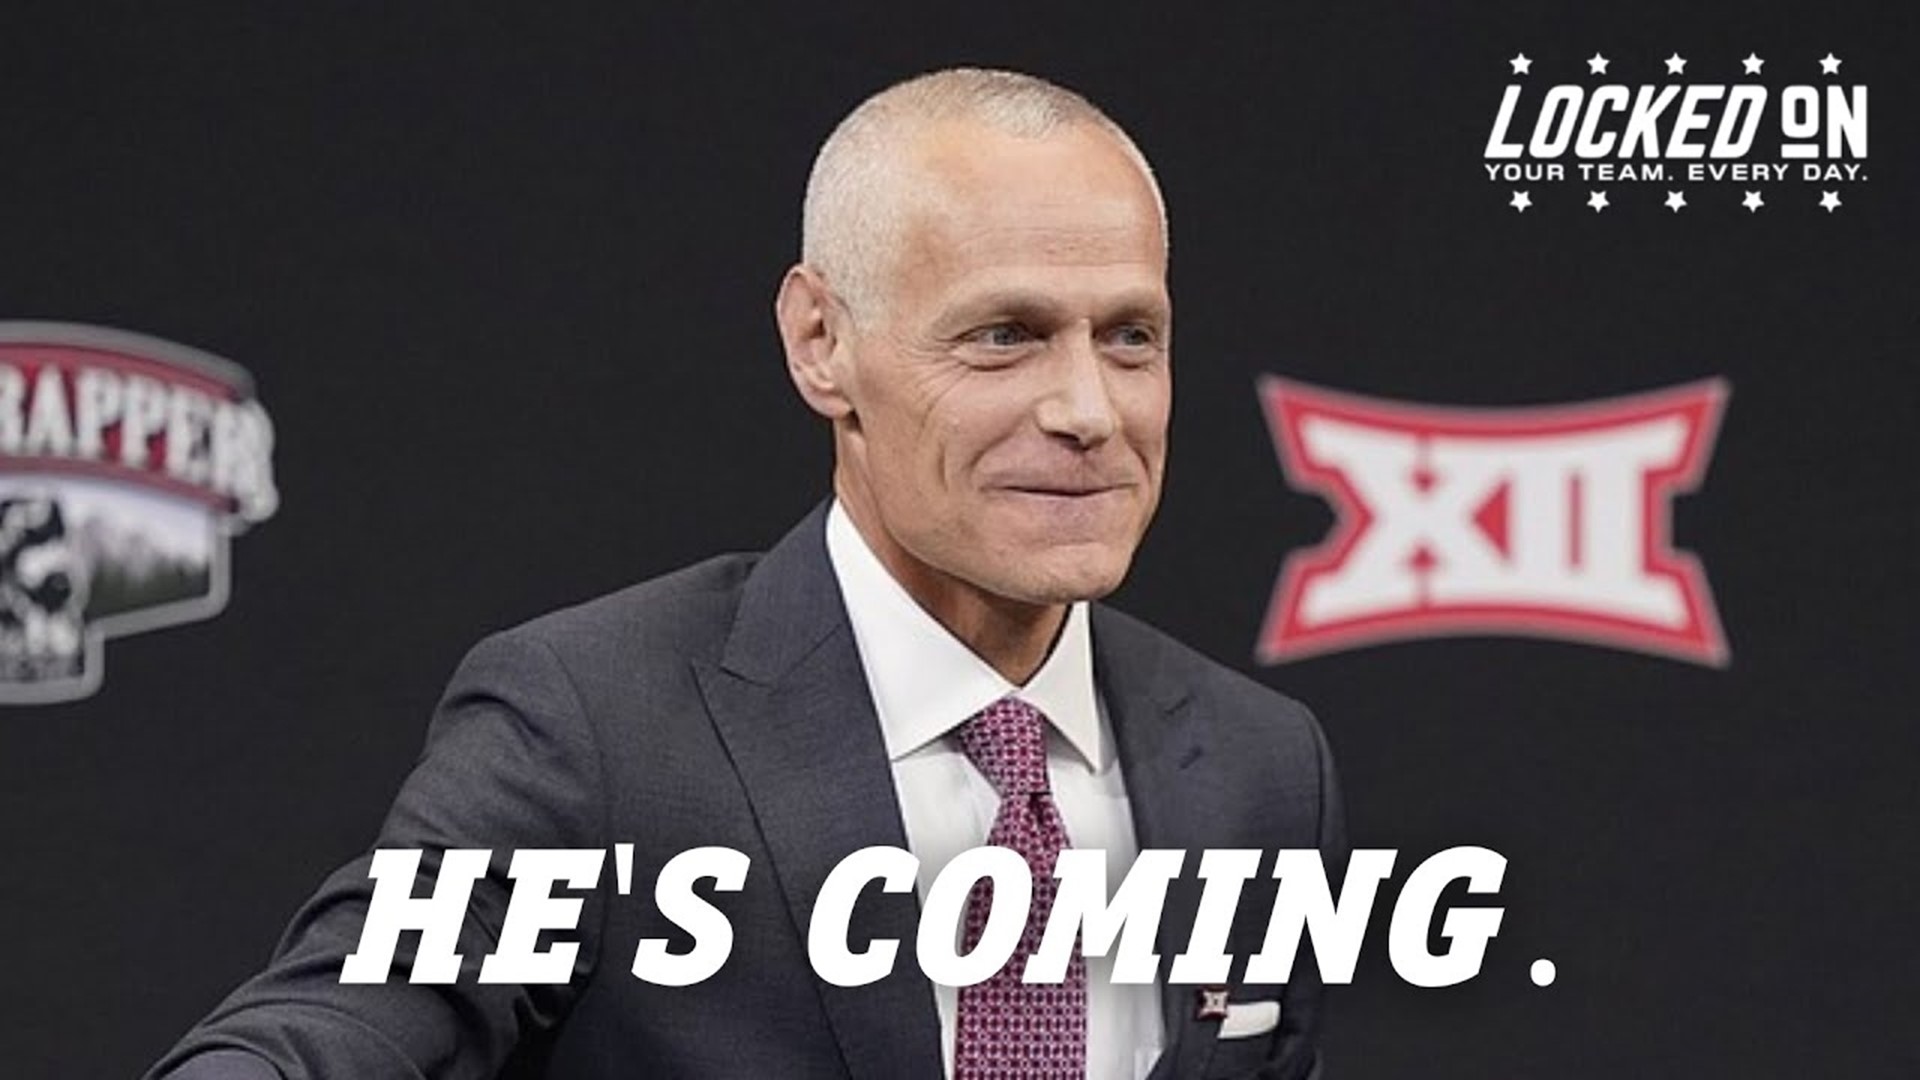 What Does ACC IMPLOSION Mean for Big 12 EXPANSION? North Carolina? Virginia? Louisville? Duke?